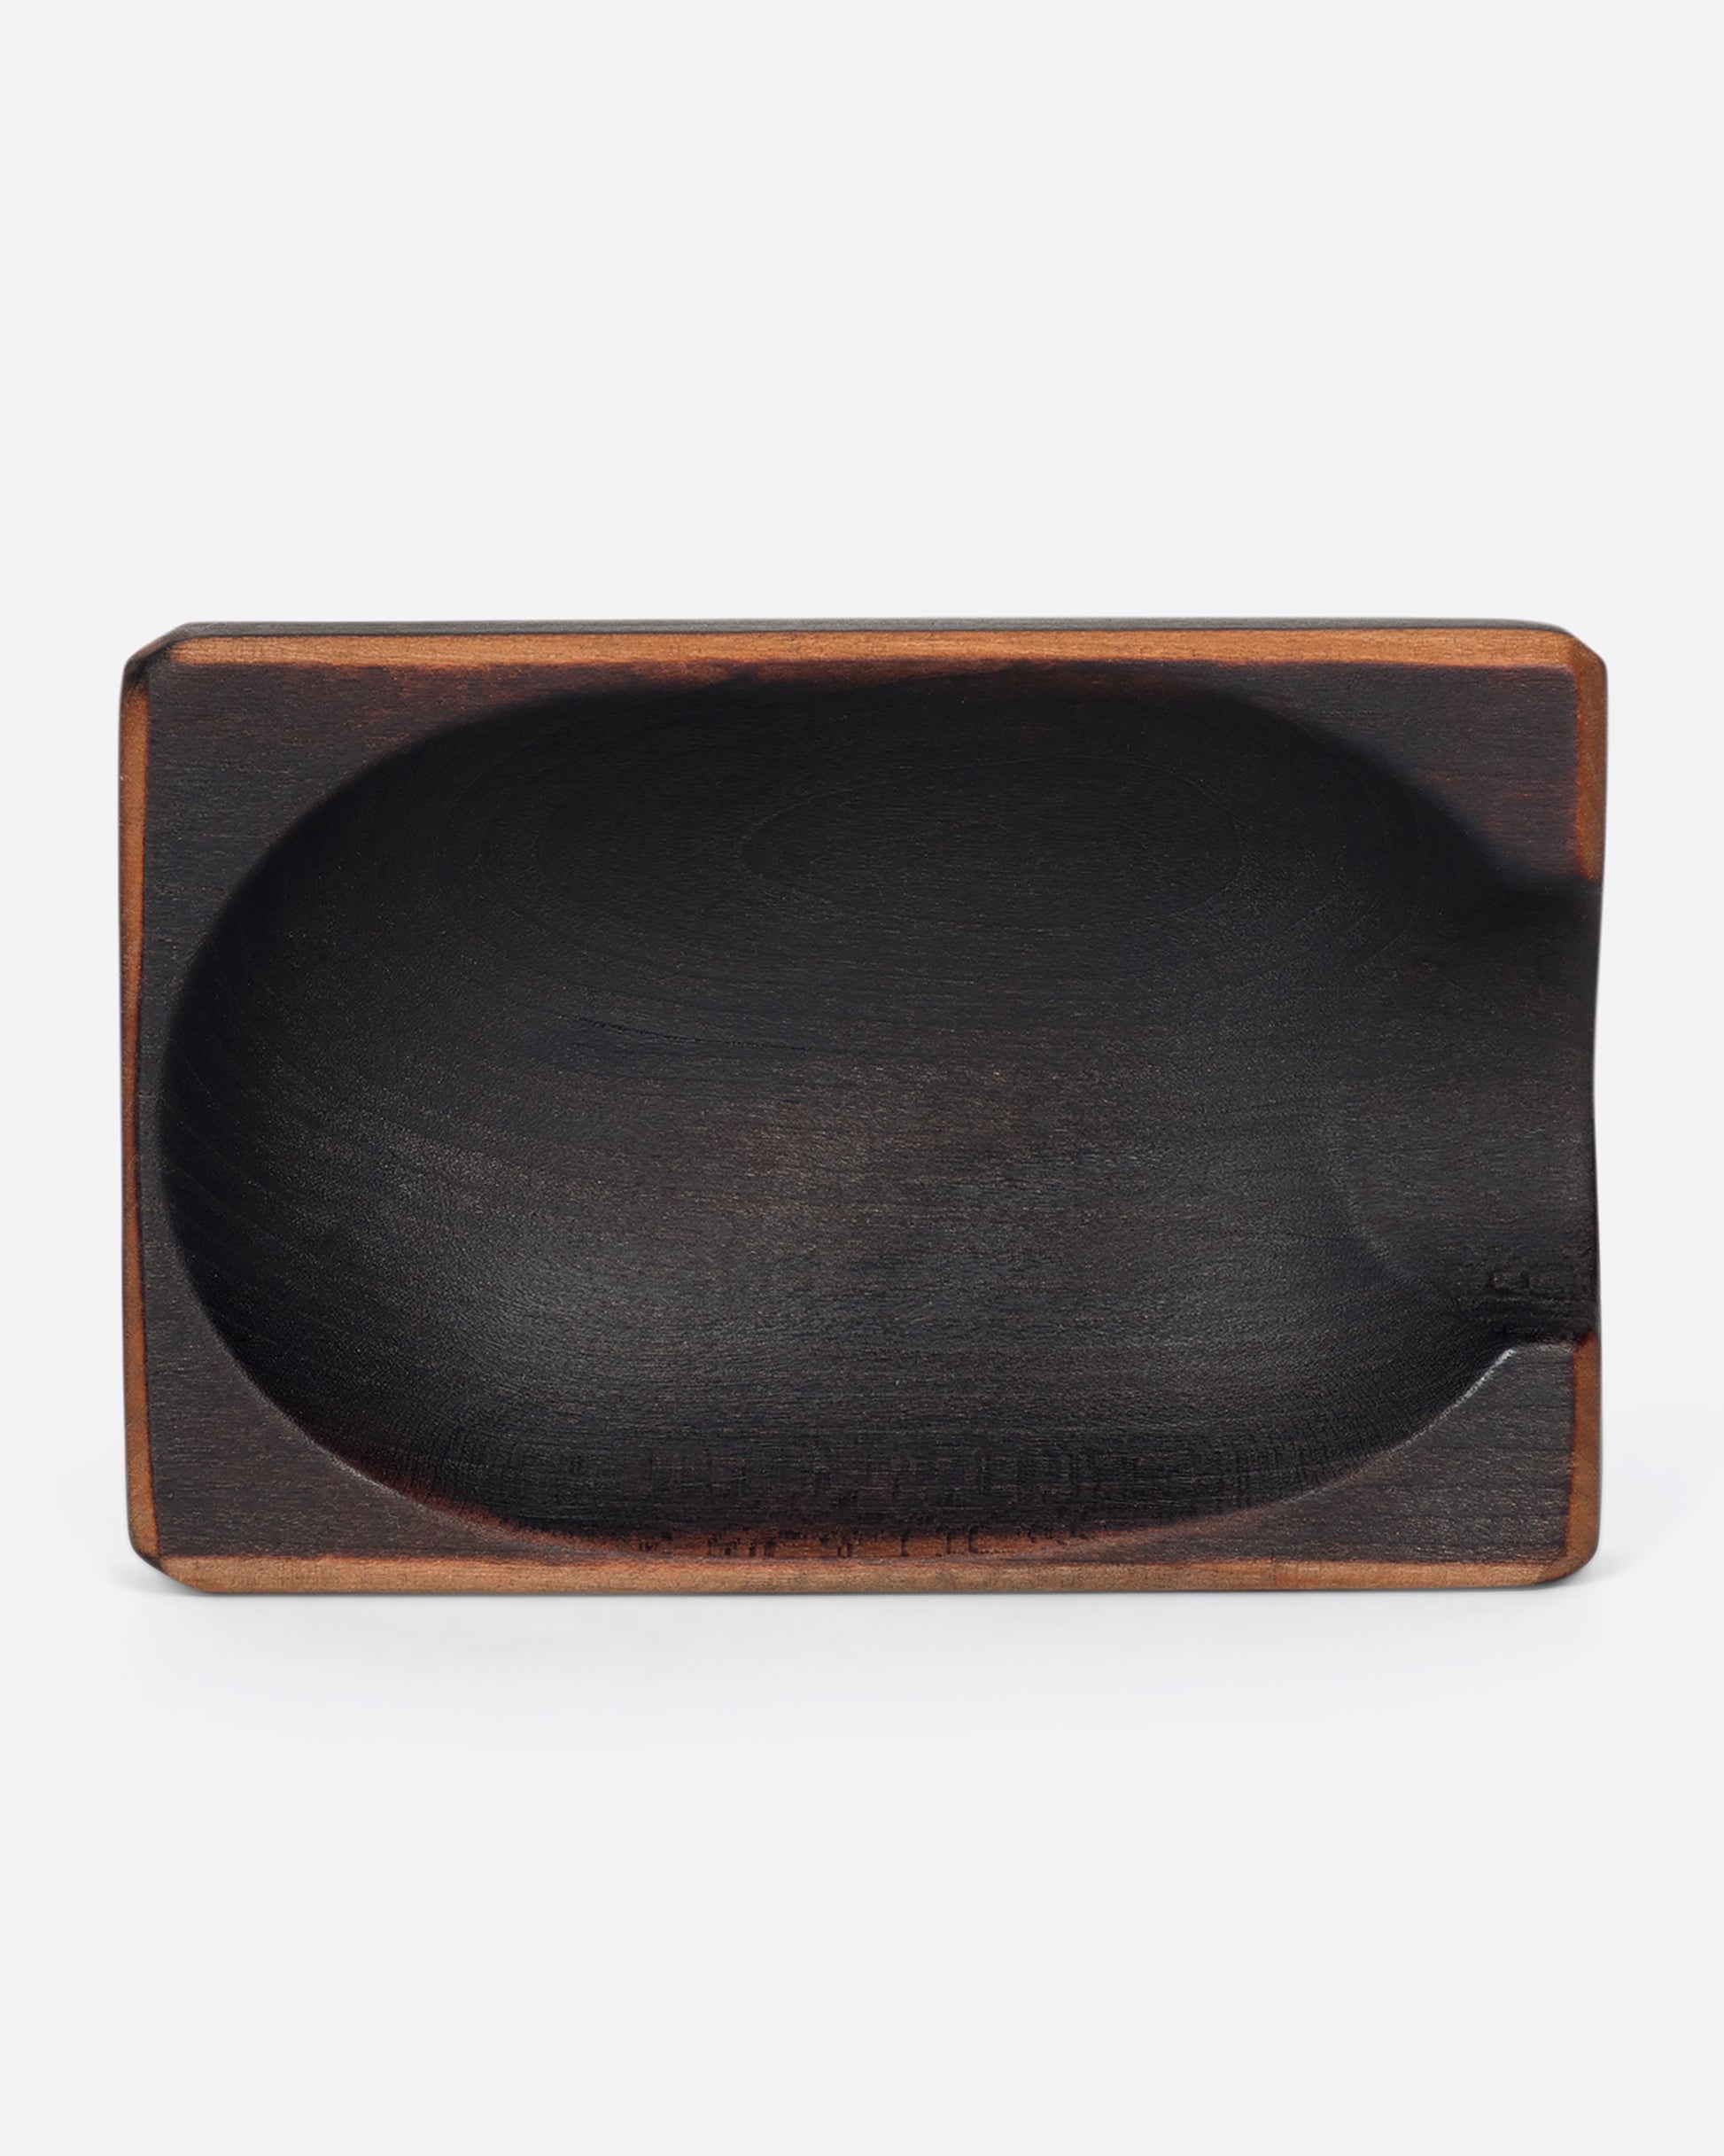 A black cherry wood spoon rest with exposed, natural wood edges.